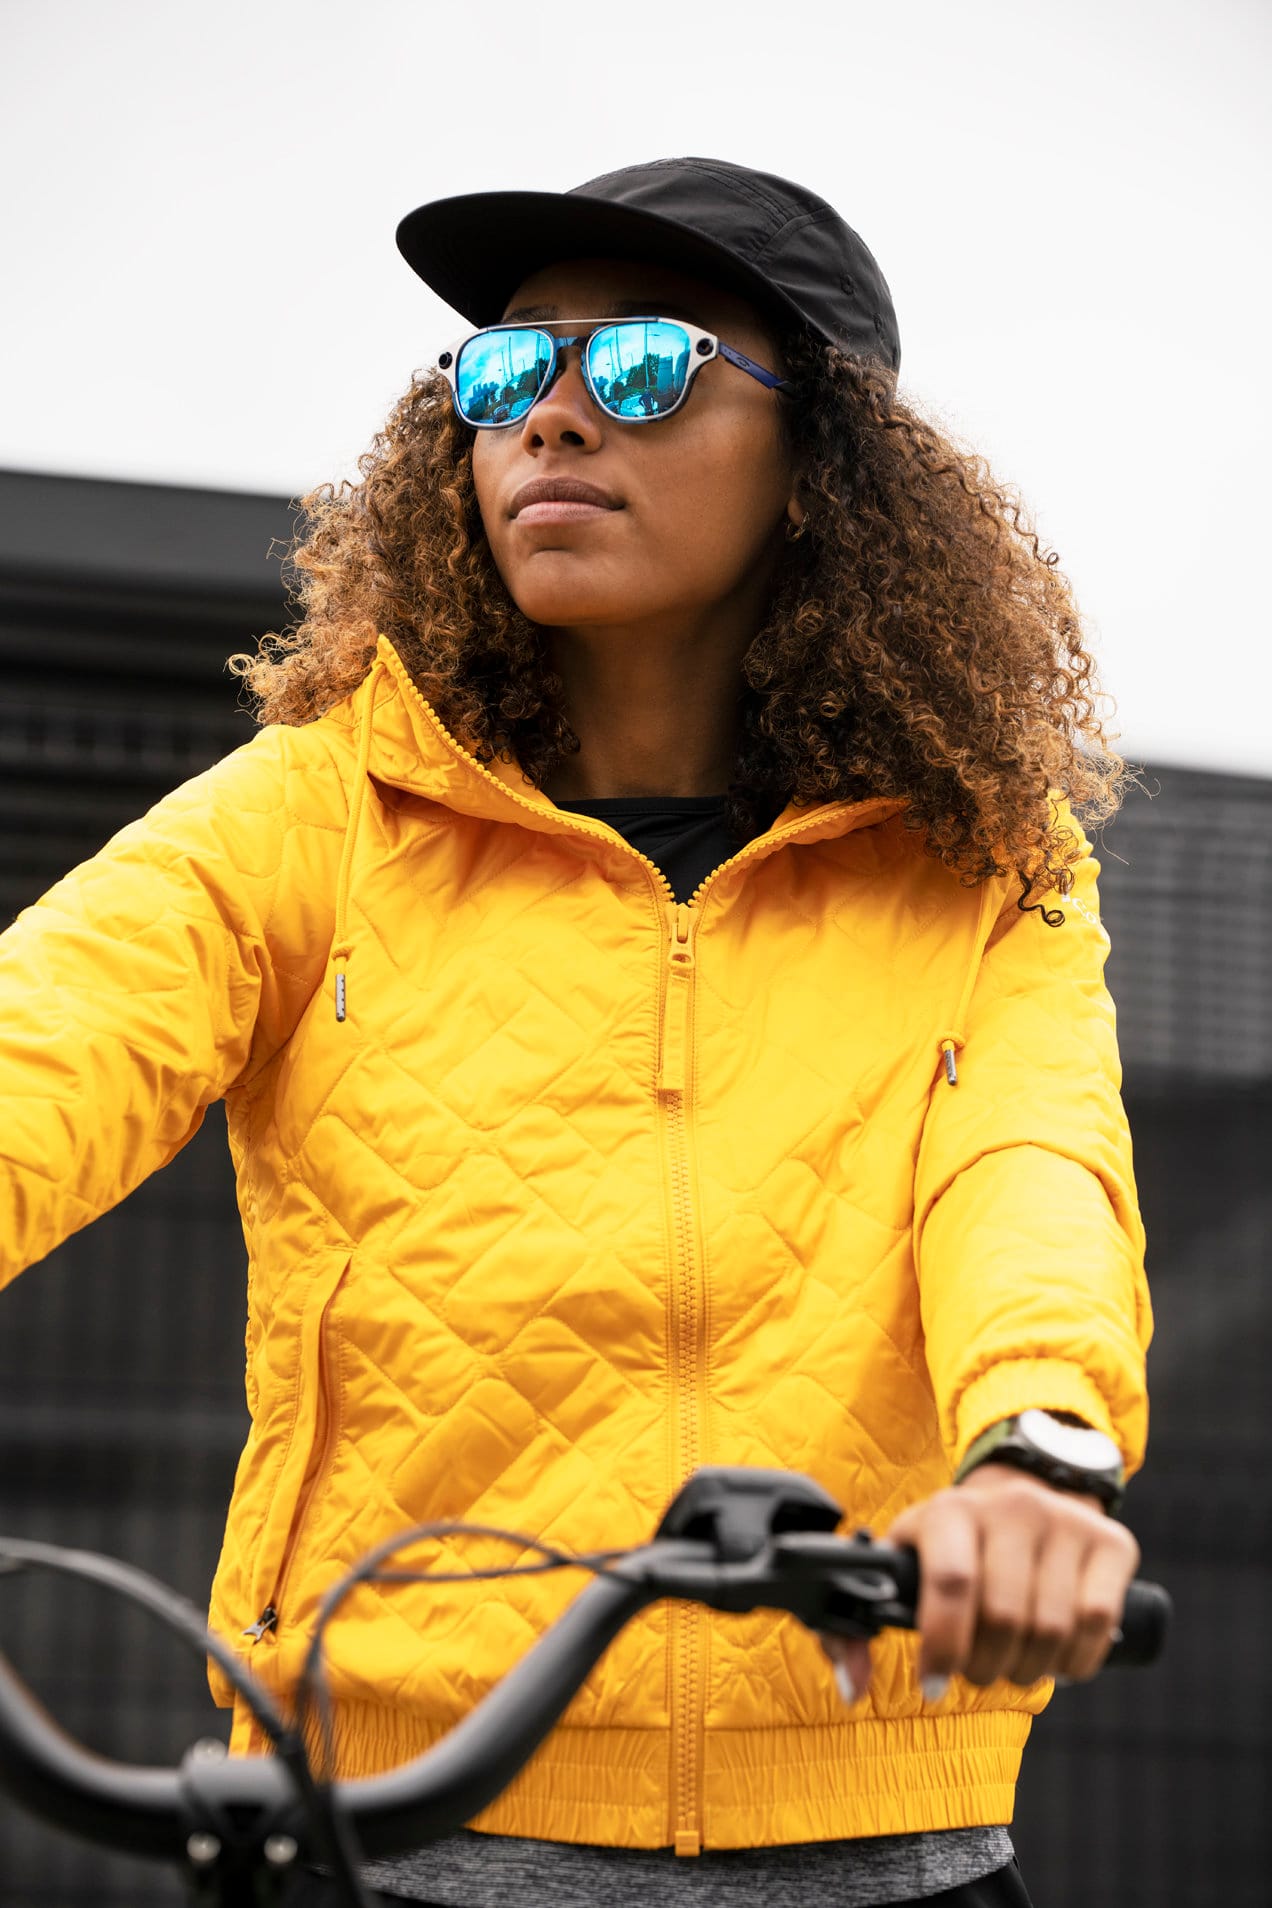 by clothes commuting ebike for Essential